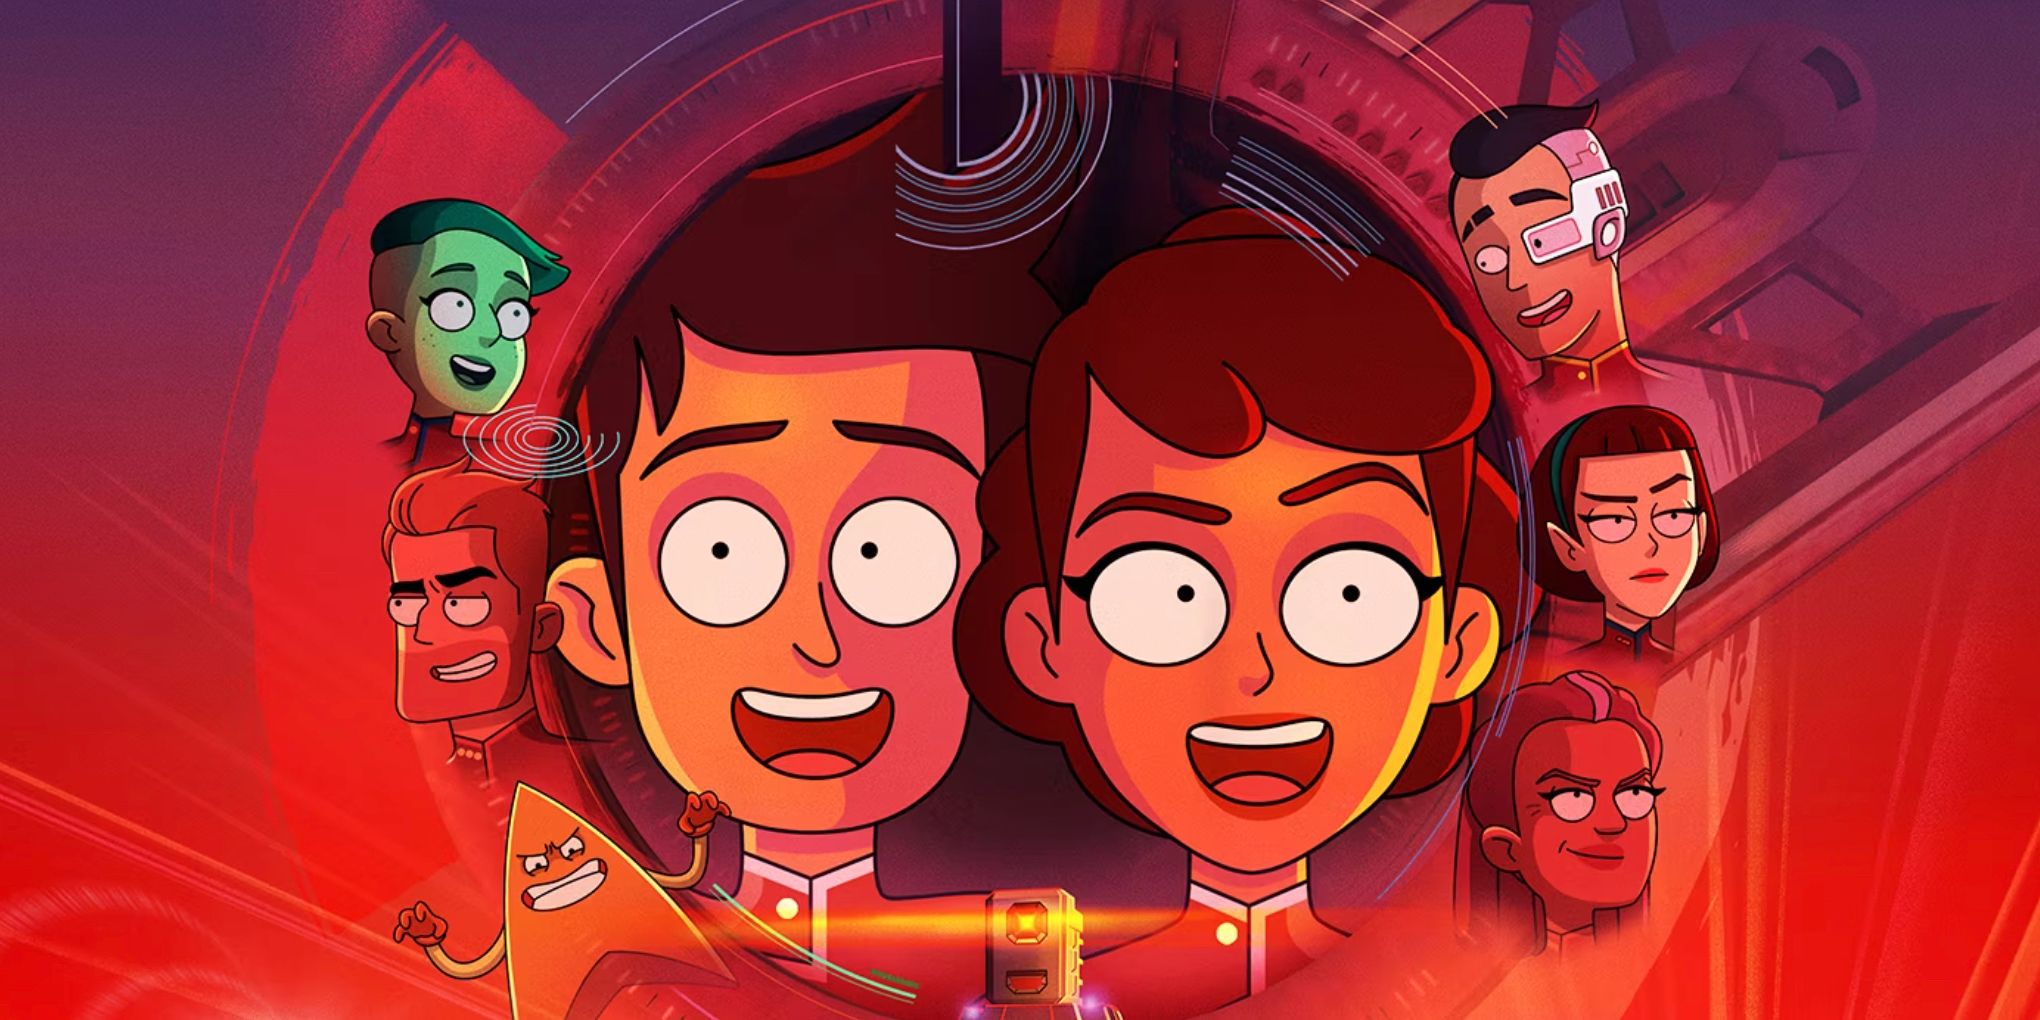 Several animated characters from Star Trek Lower Decks are centered in the cropped season 4 poster